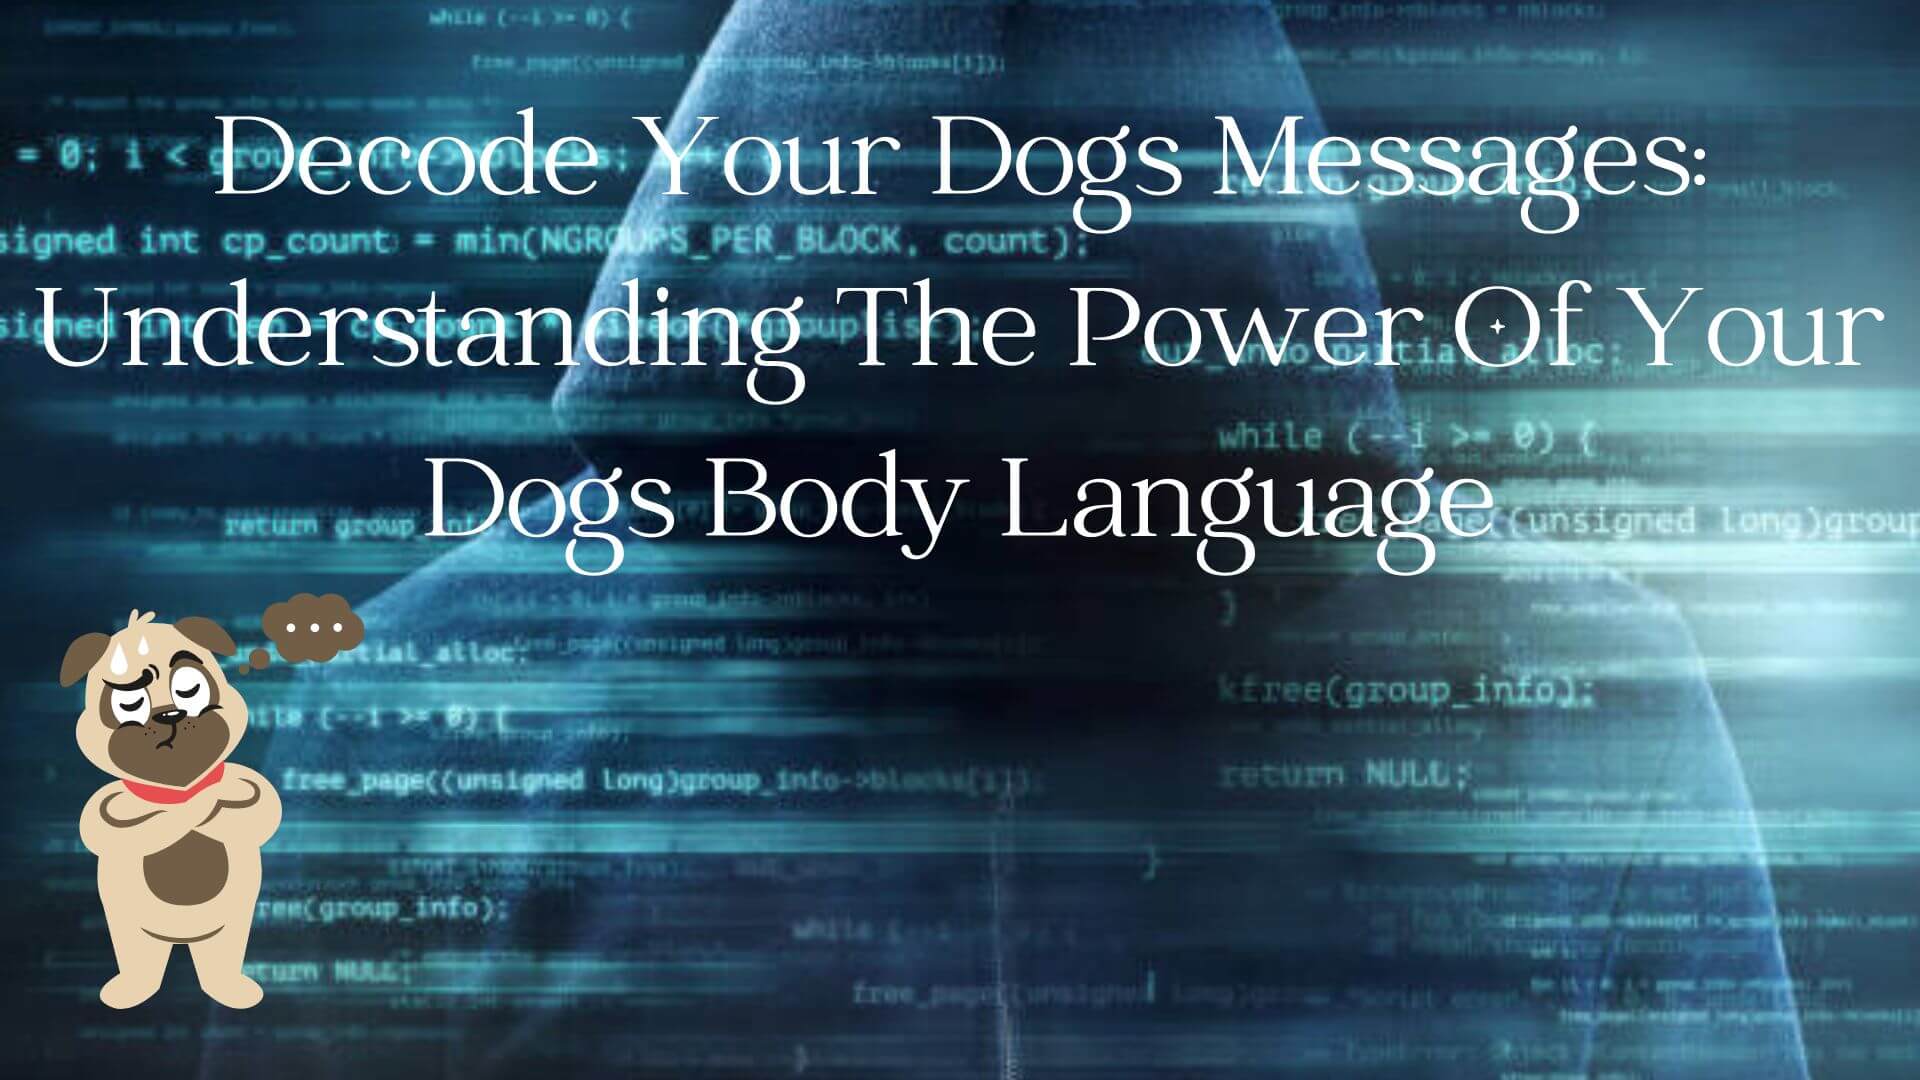 Decode Your Dogs Messages: Understanding The Power Of Your Dogs Body Language